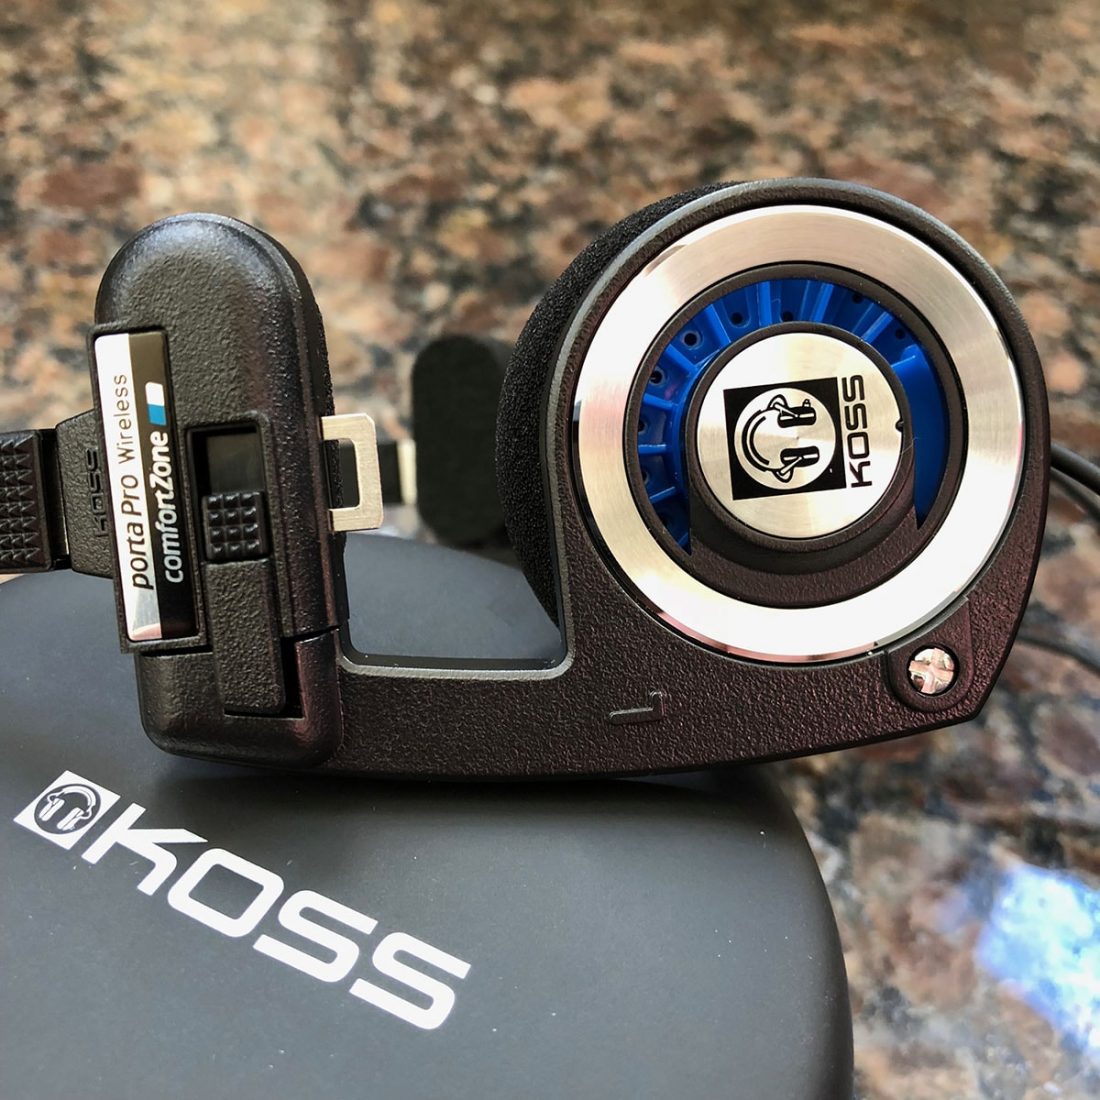 Koss Porta Pro Wireless and zippered case (the side ear plates look like musical notes)